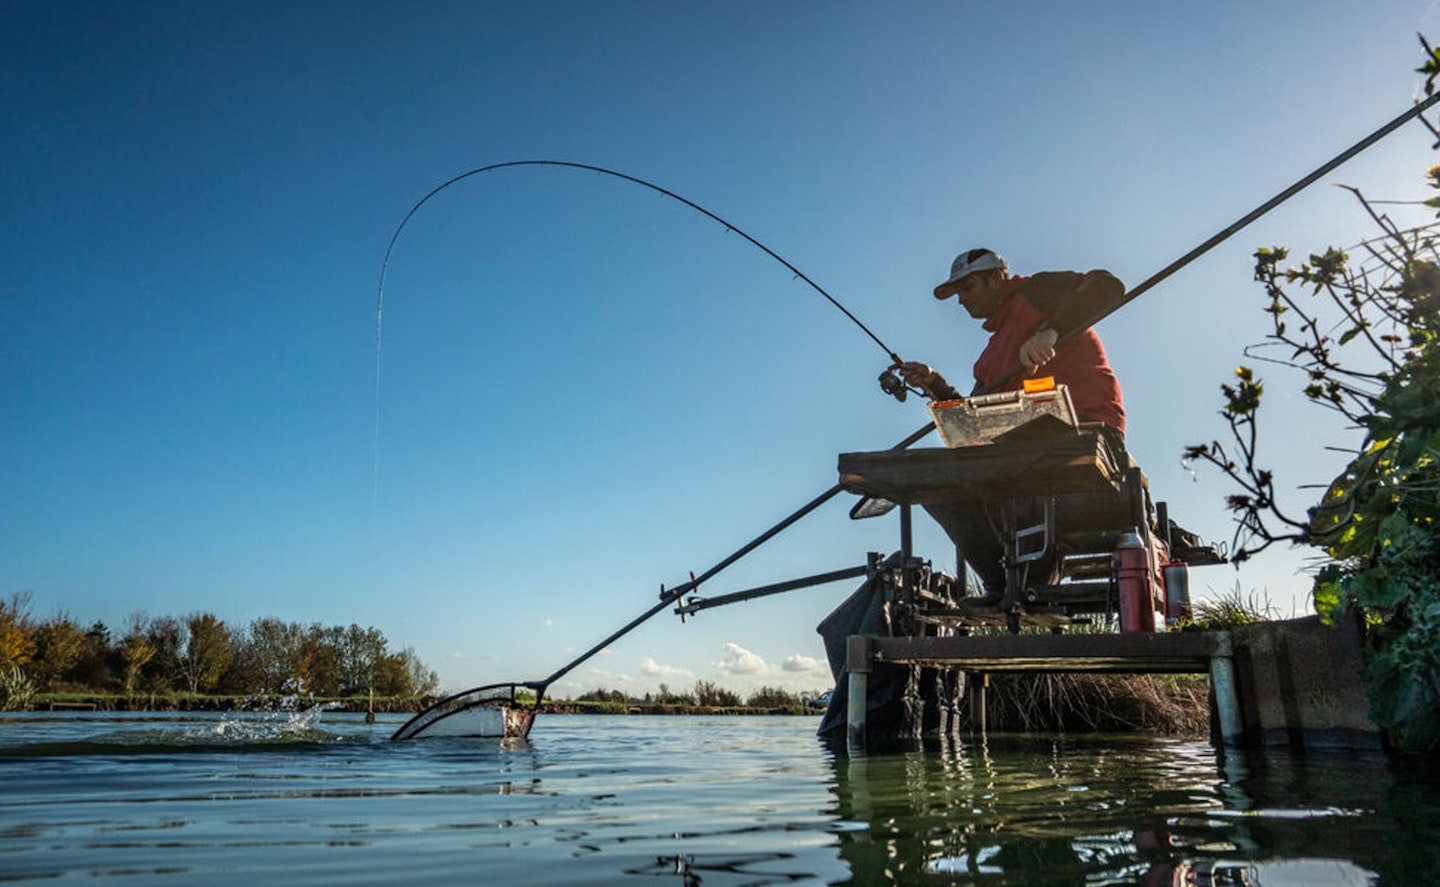 How to make the perfect cast every time when feeder fishing